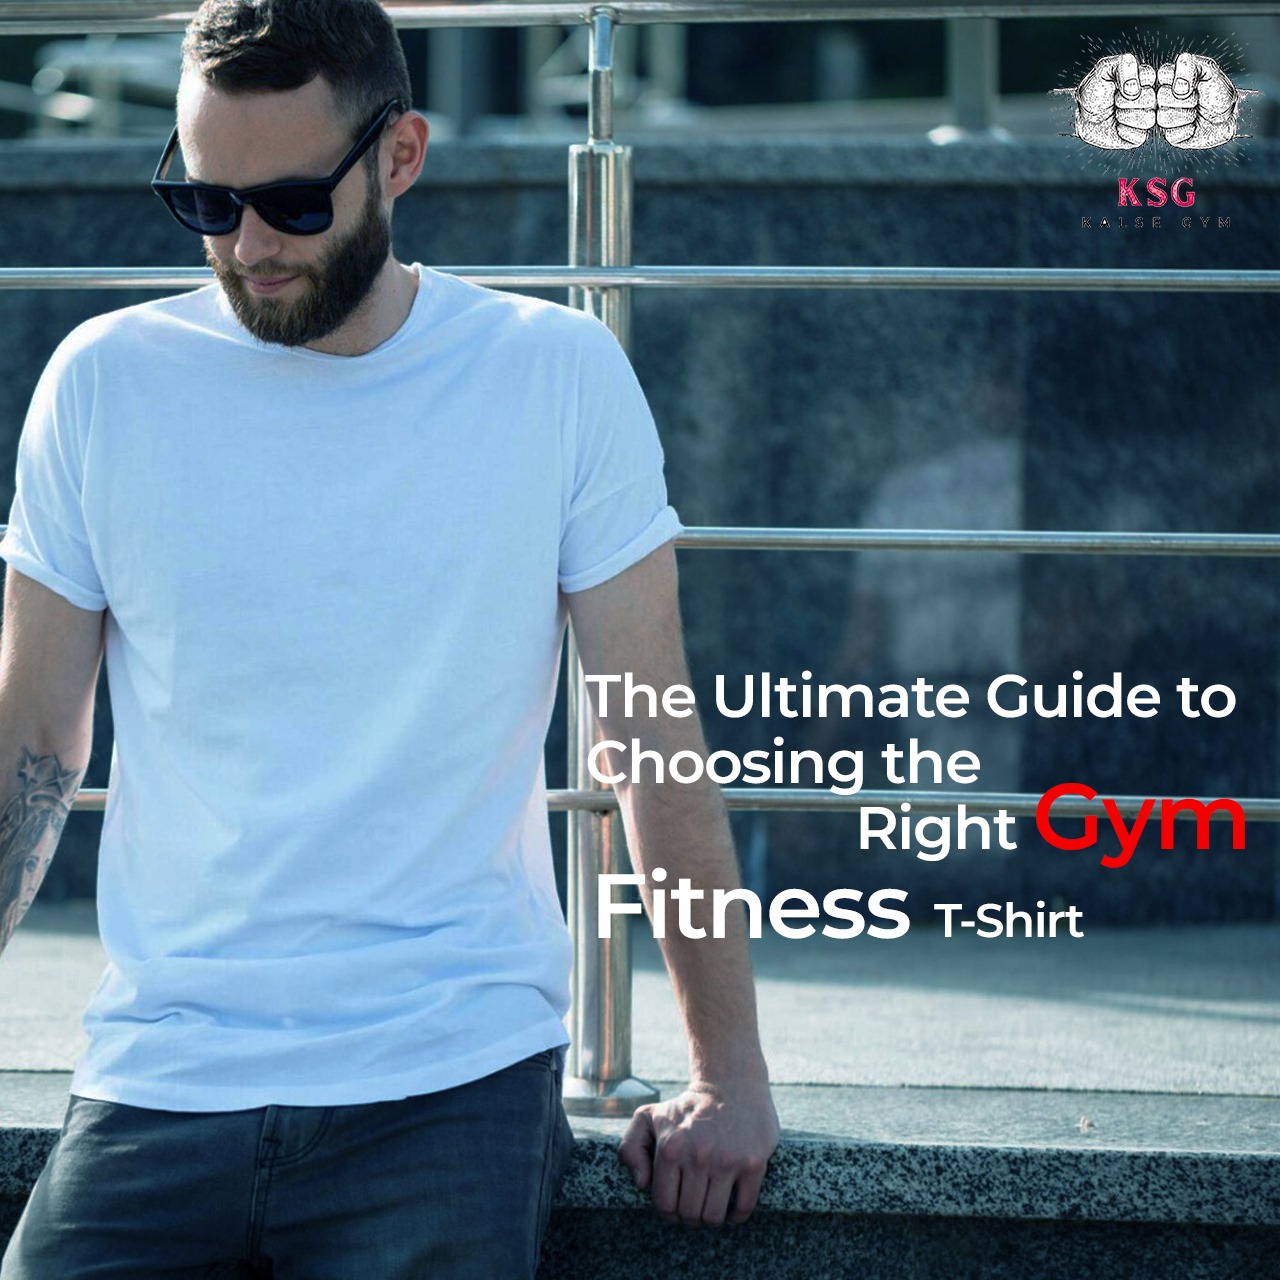 The Ultimate Guide to Choosing the Right Gym Fitness T-Shirt